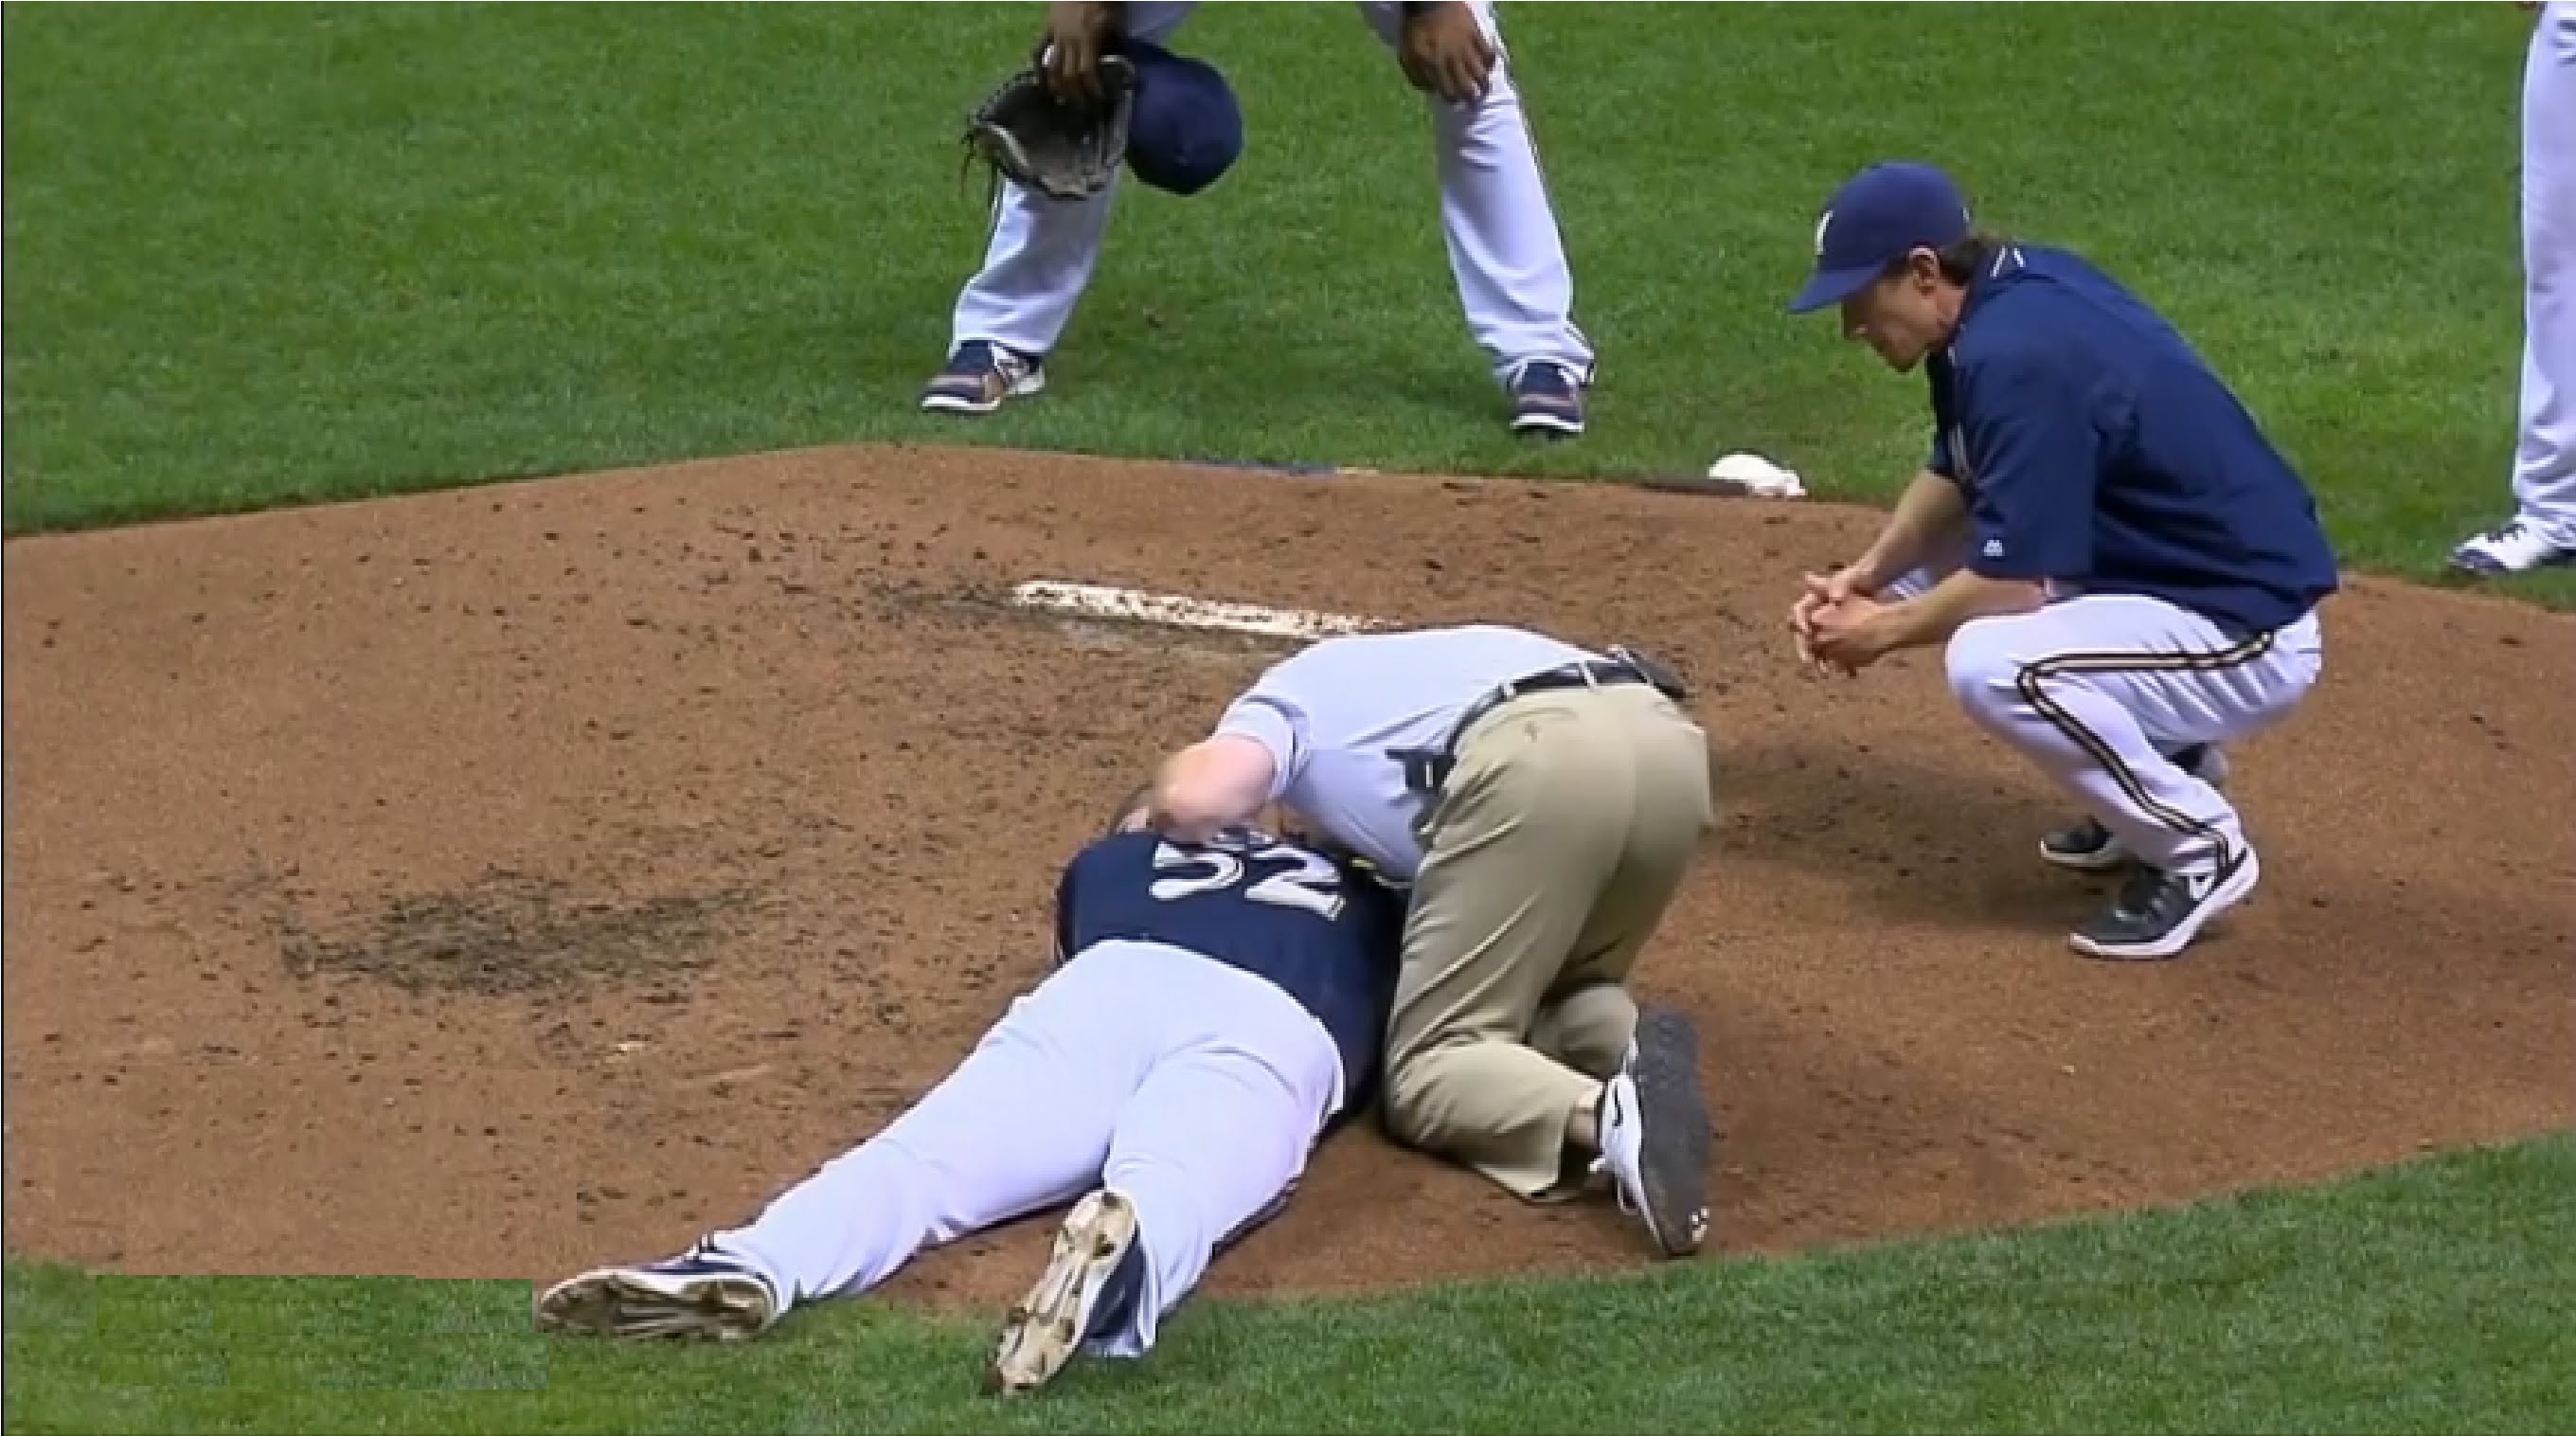 Brewers pitcher Jimmy Nelson pelted with a line drive to the head